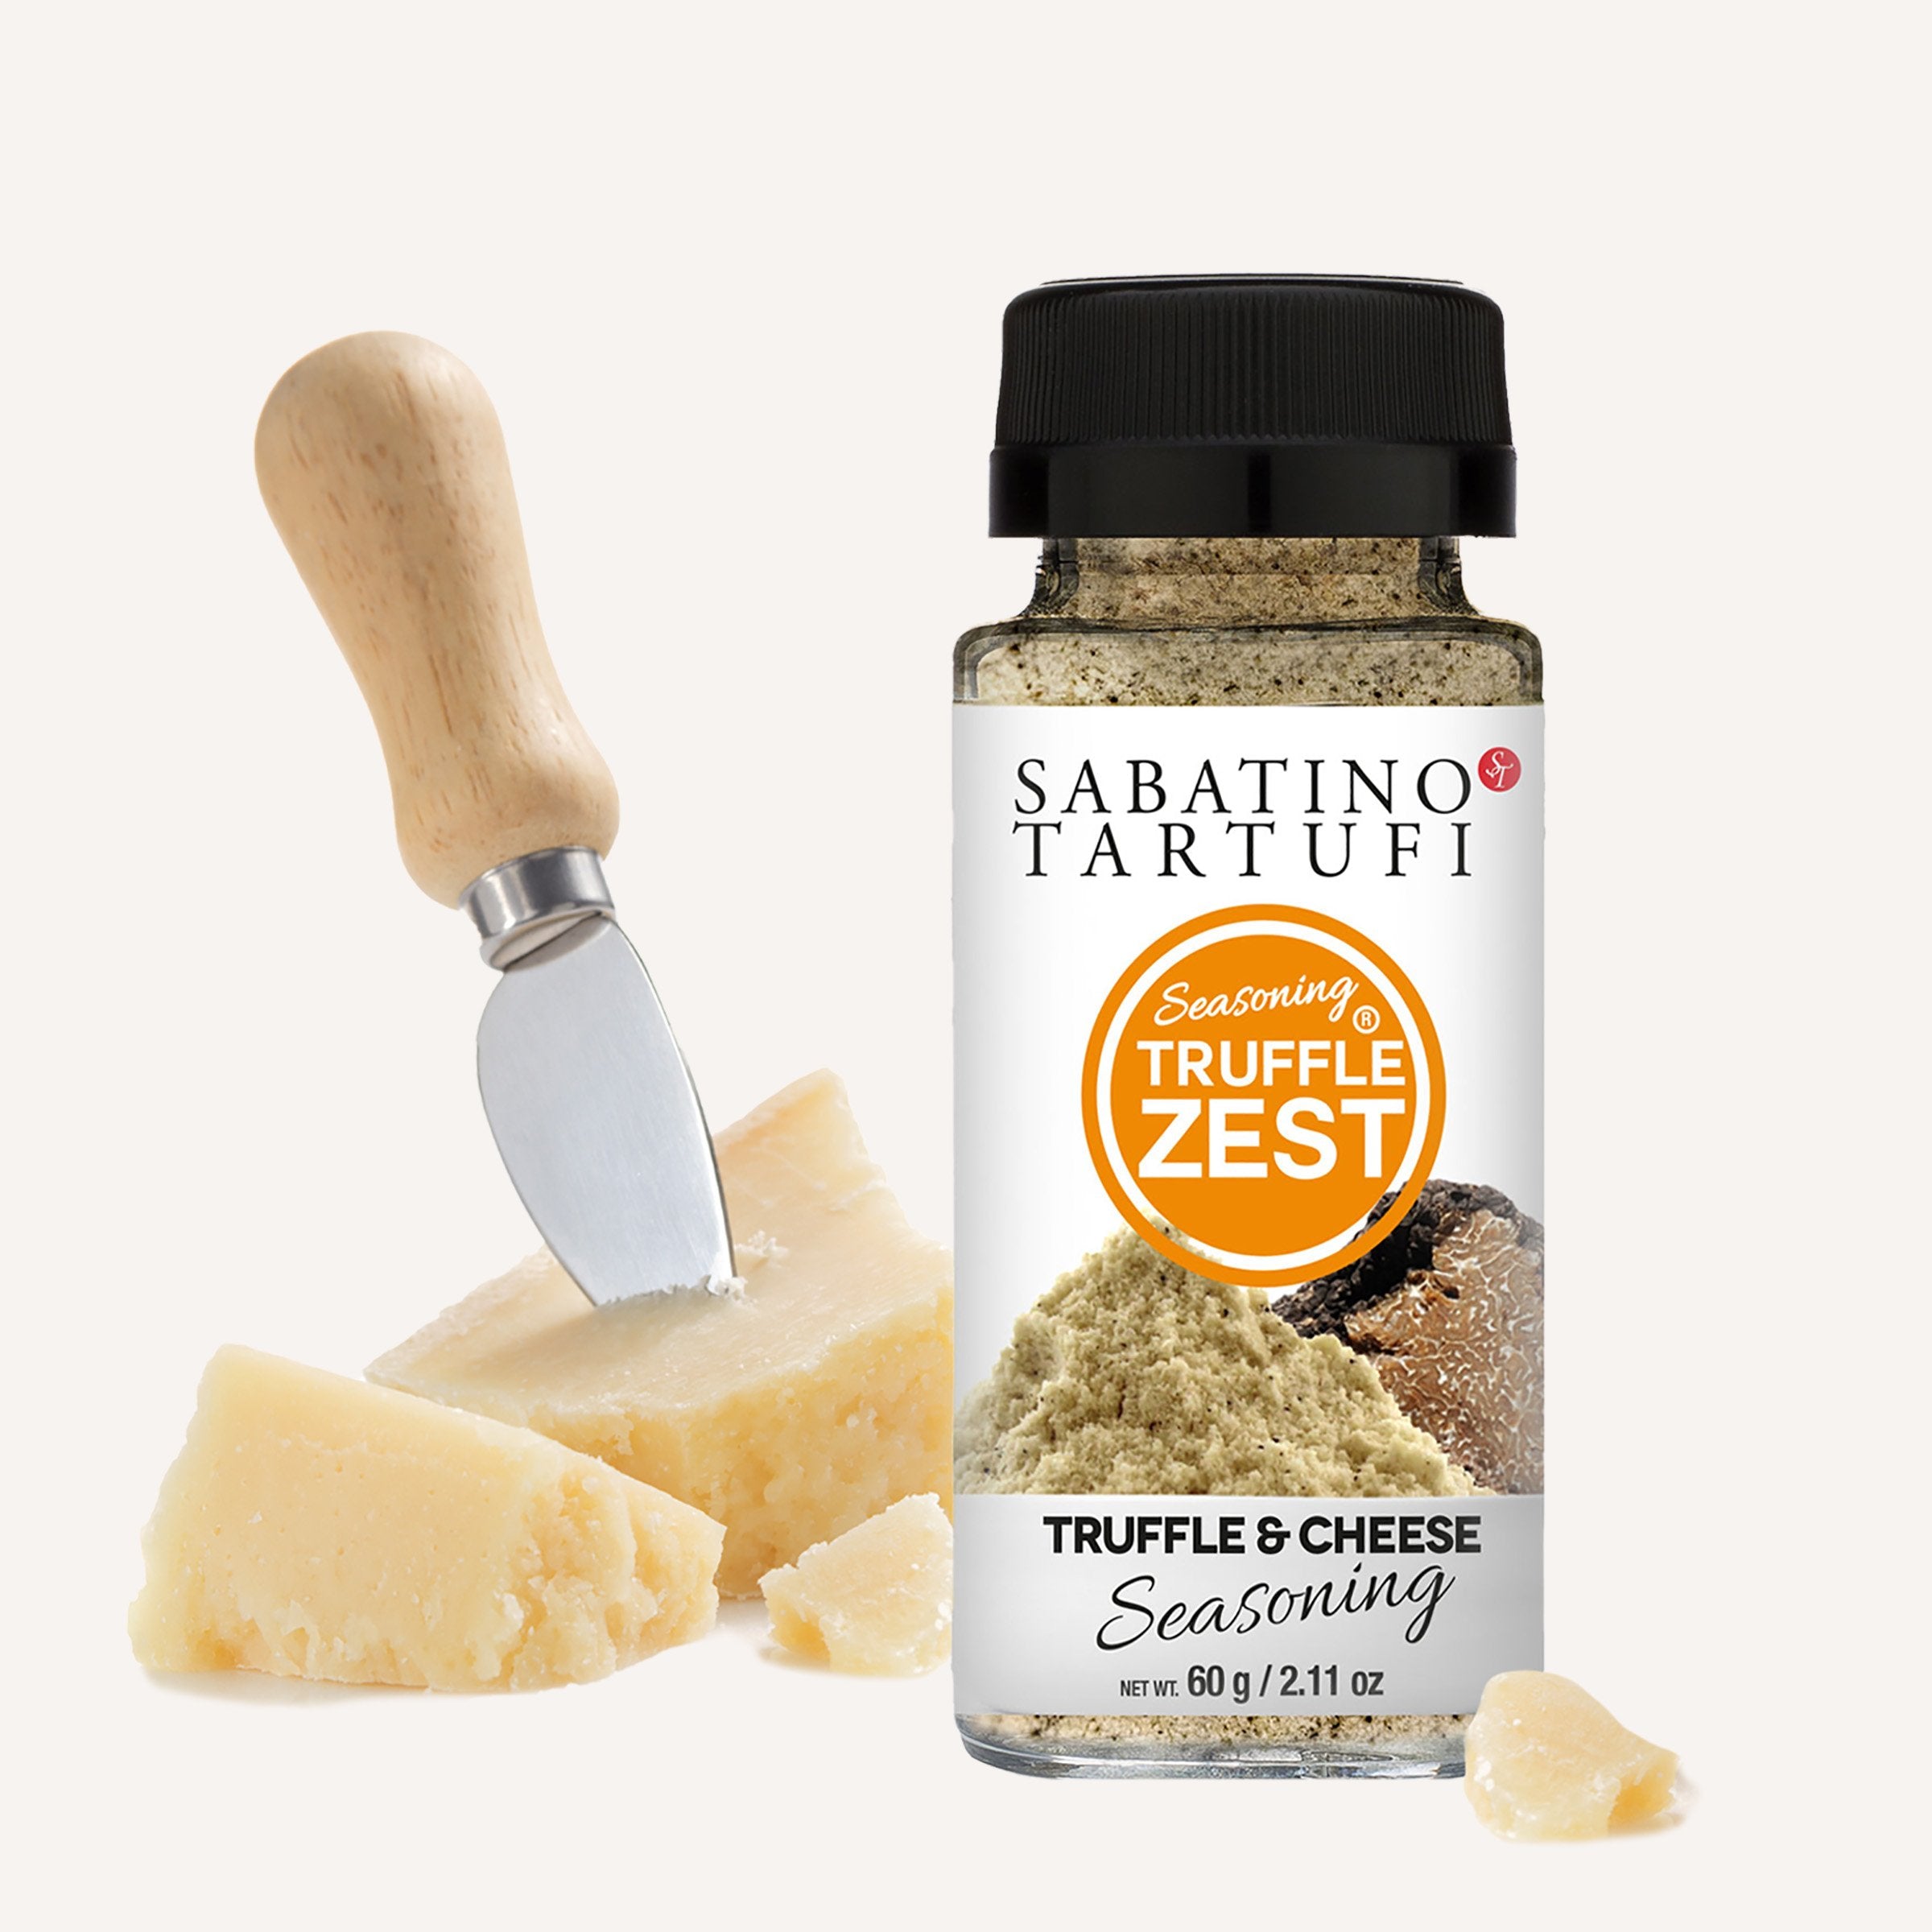 Truffle Zest® & Cheese - 2.11 oz <br>Case Pack 6 Units